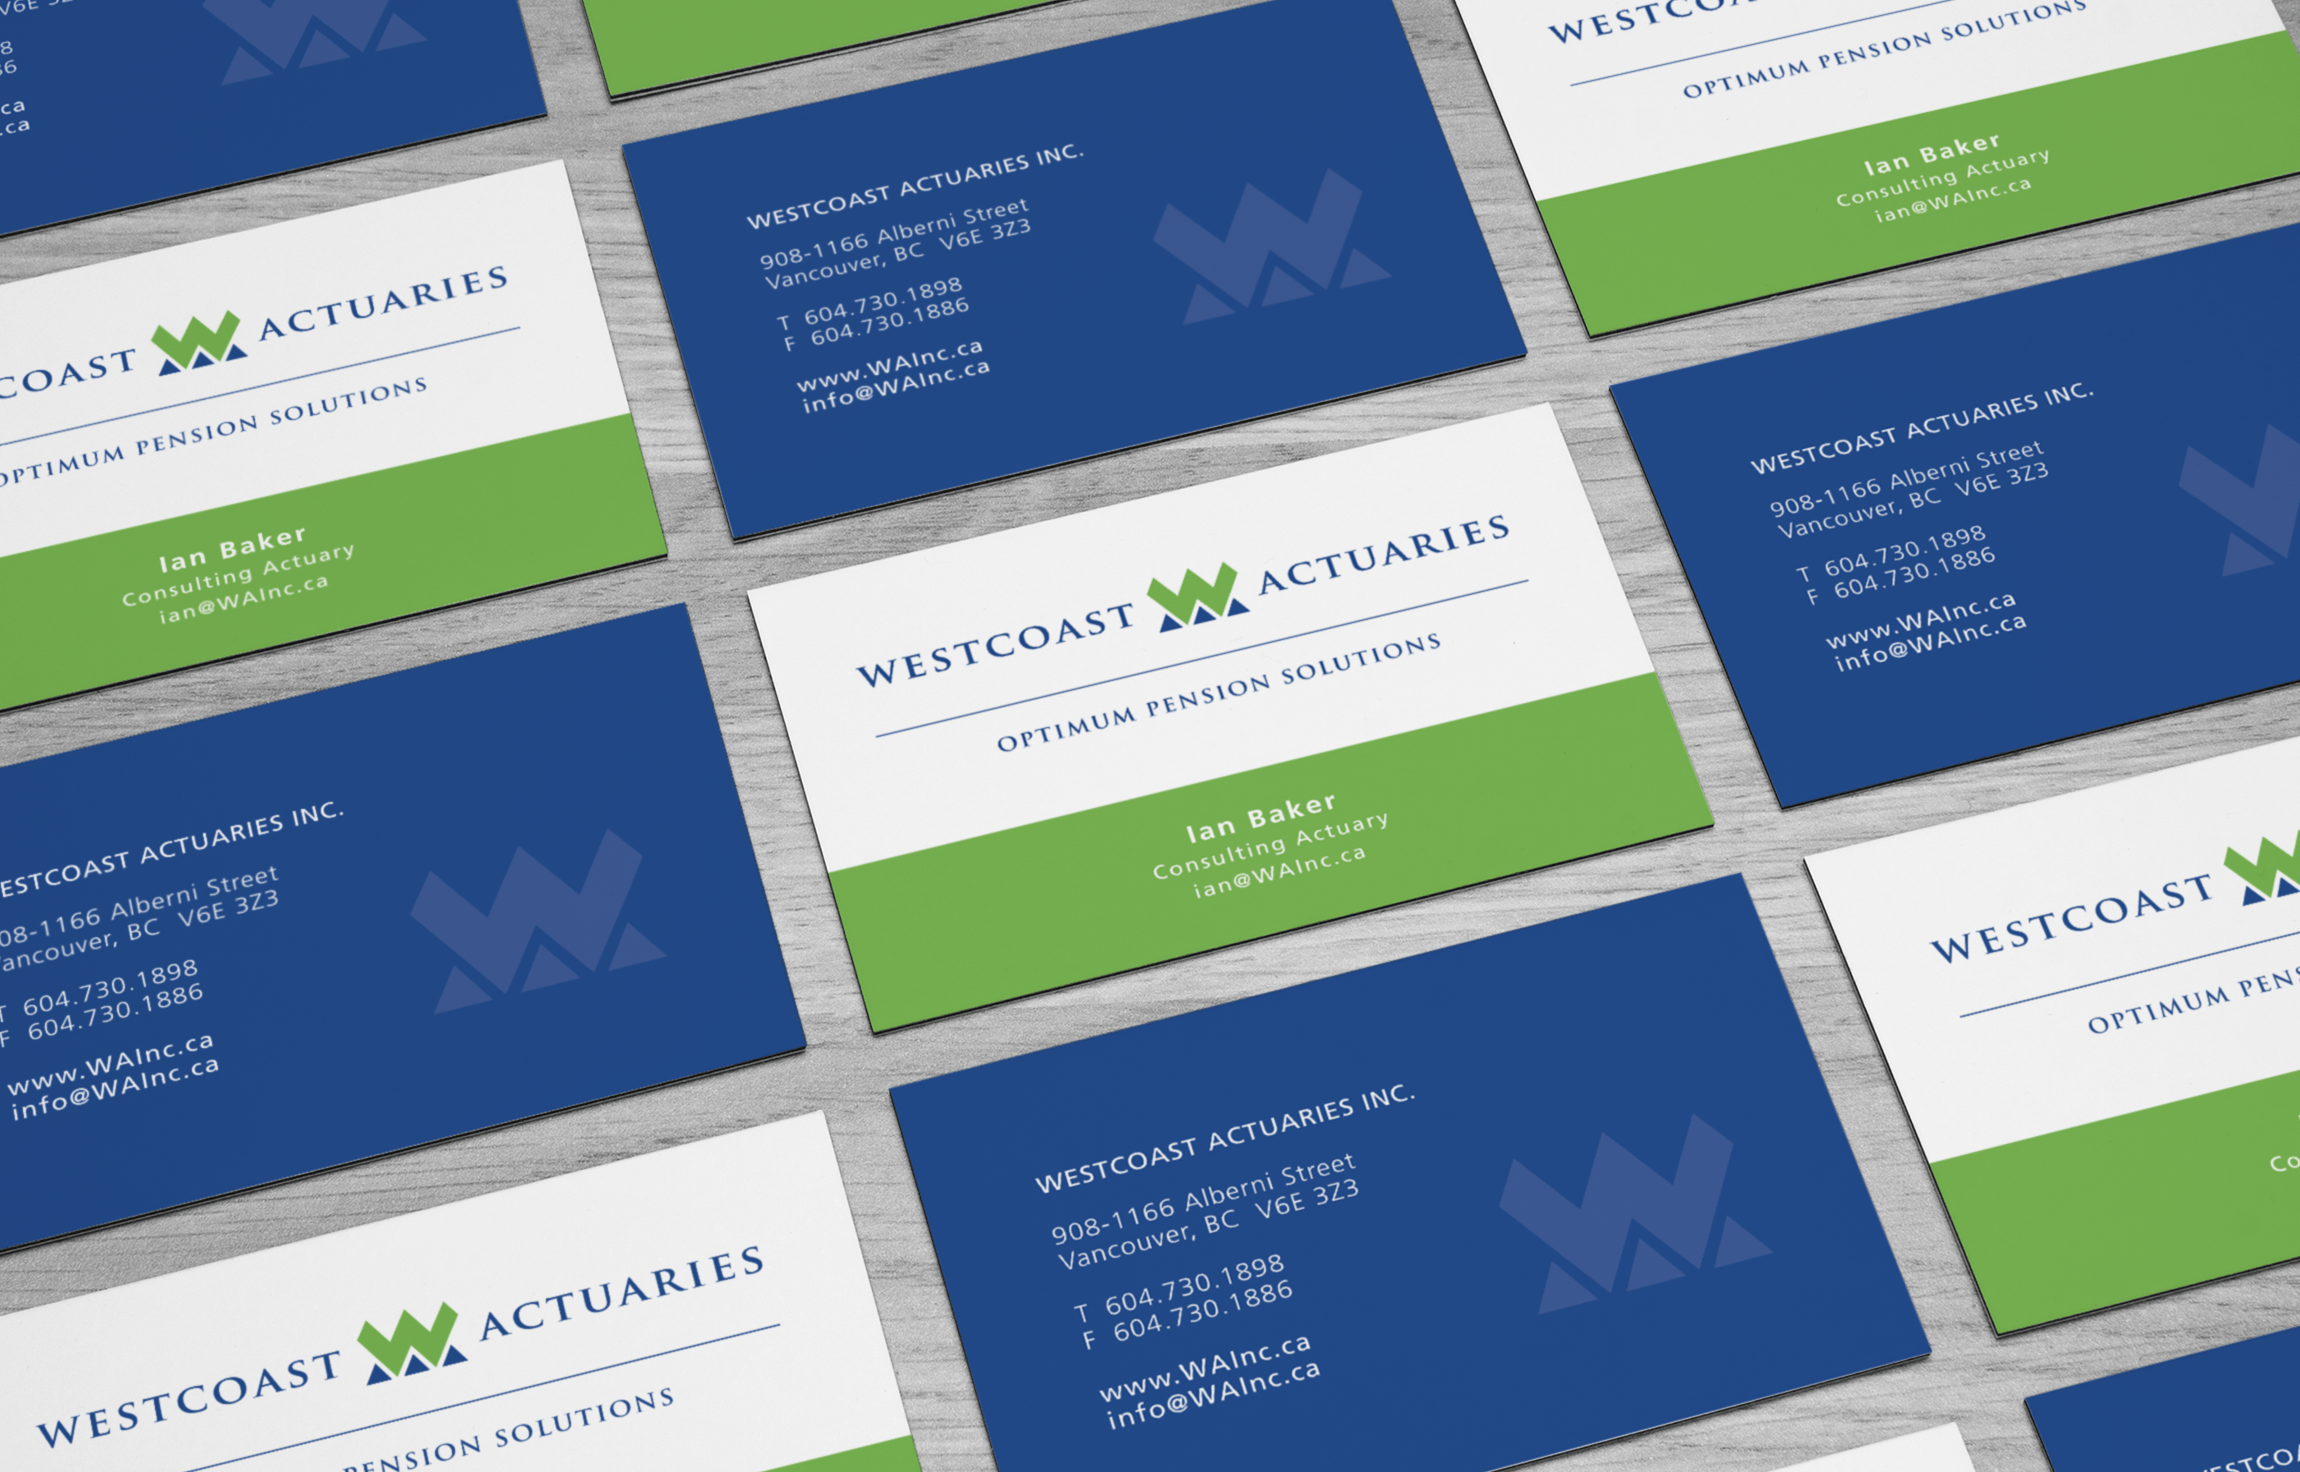 Vancouver Business Card Design